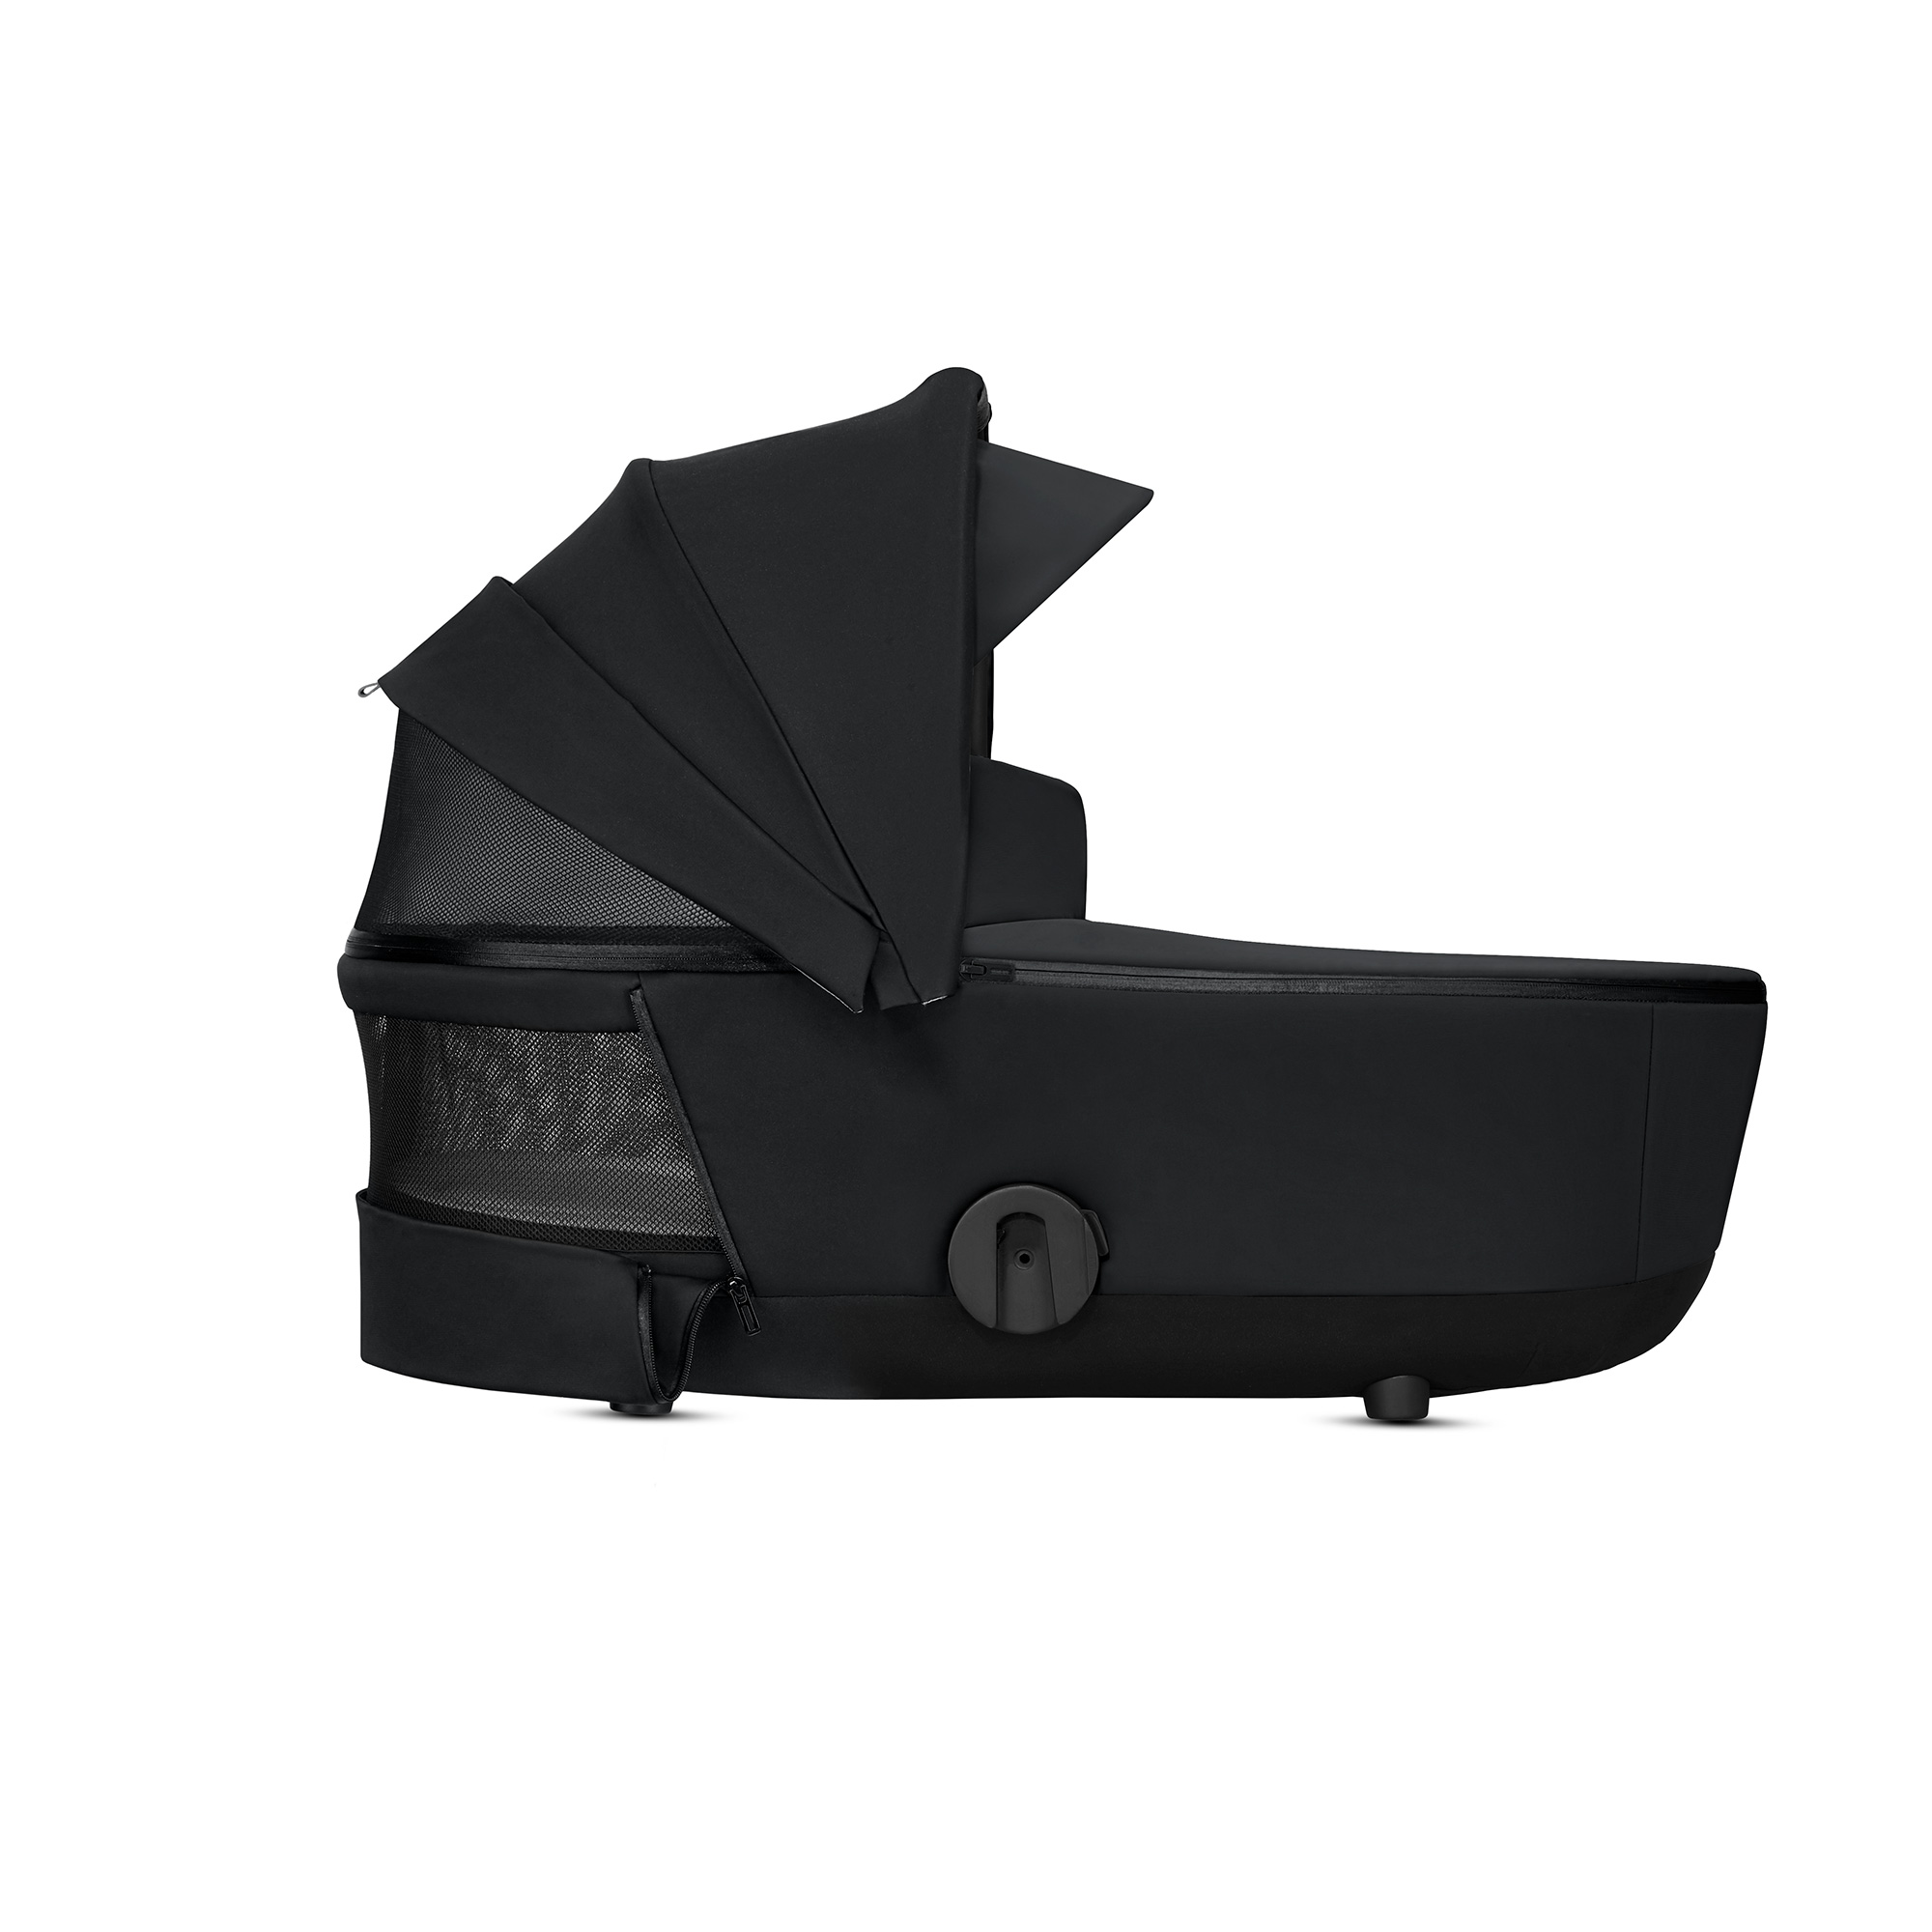 MIOS LUX Carry Cot